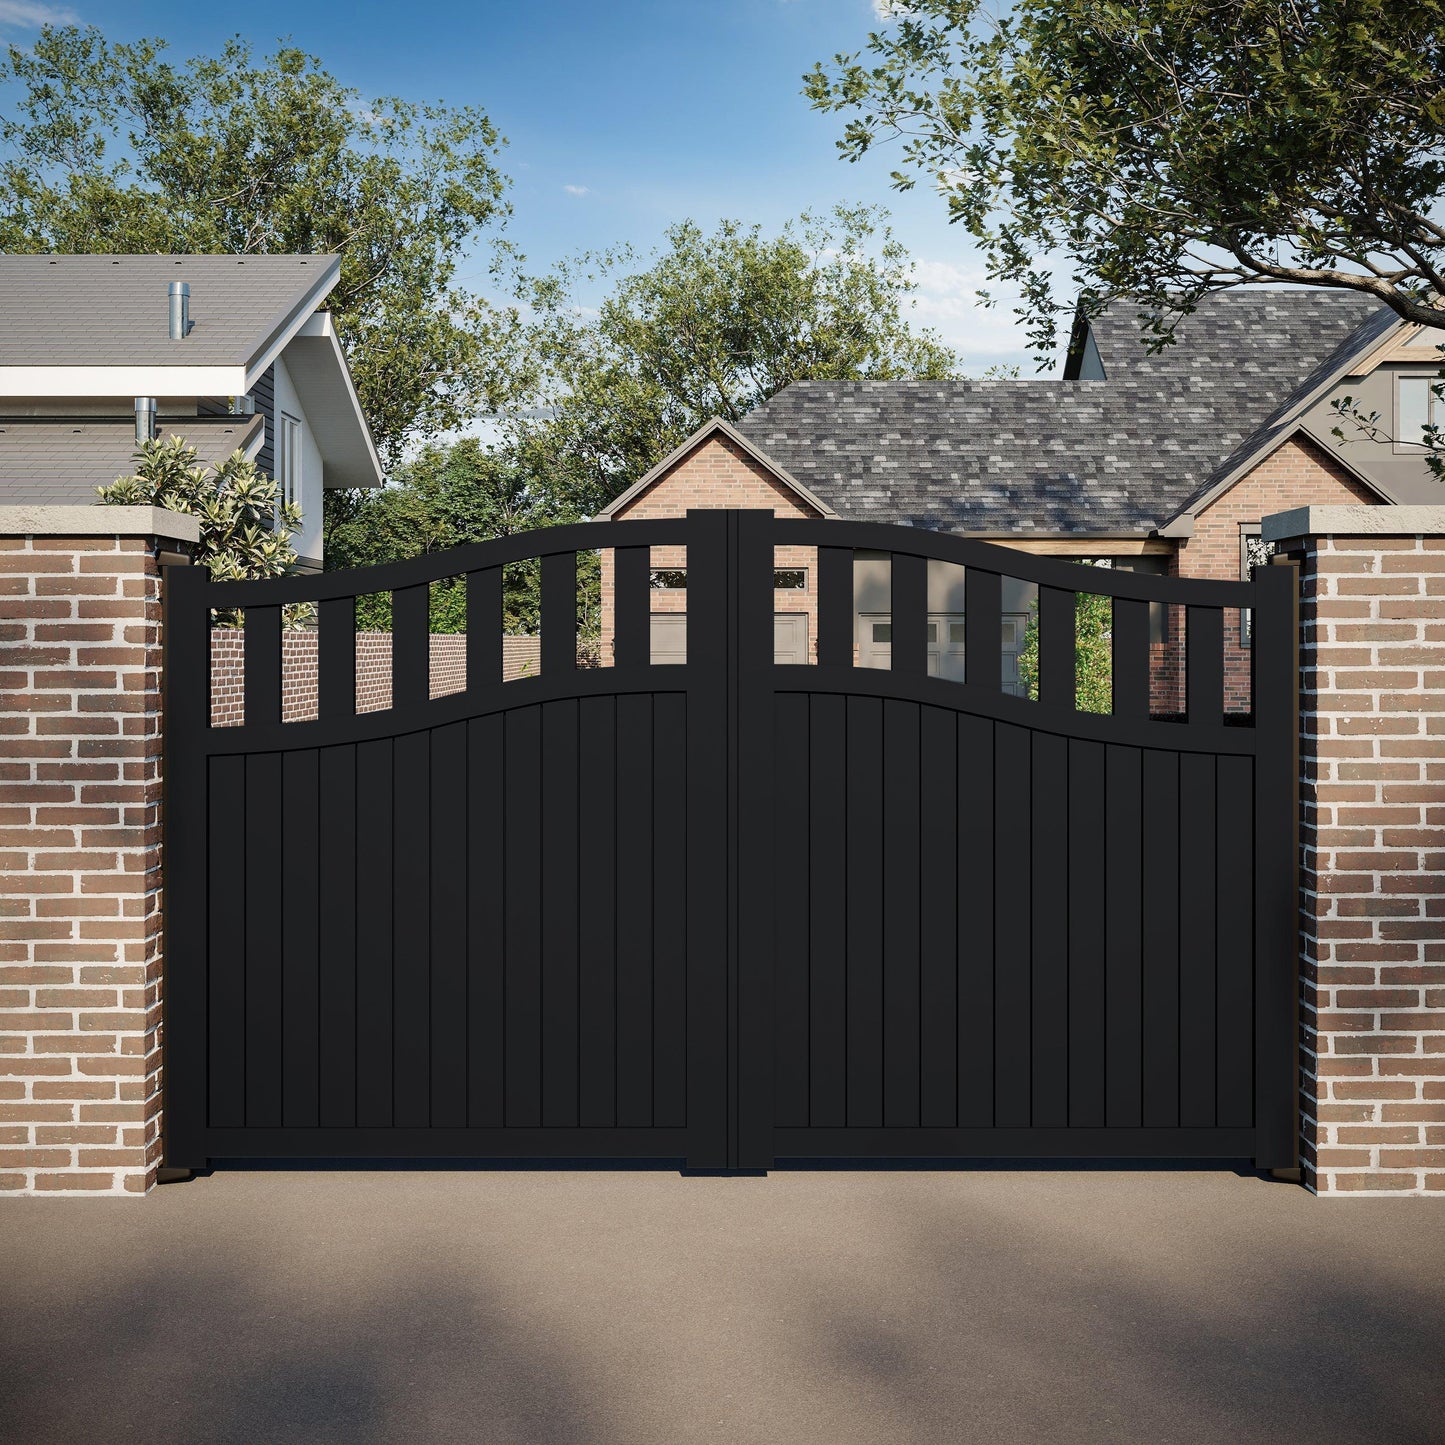 OpenTop Elegance | Aluminium Partial Privacy Driveway Gate - Residential Gates